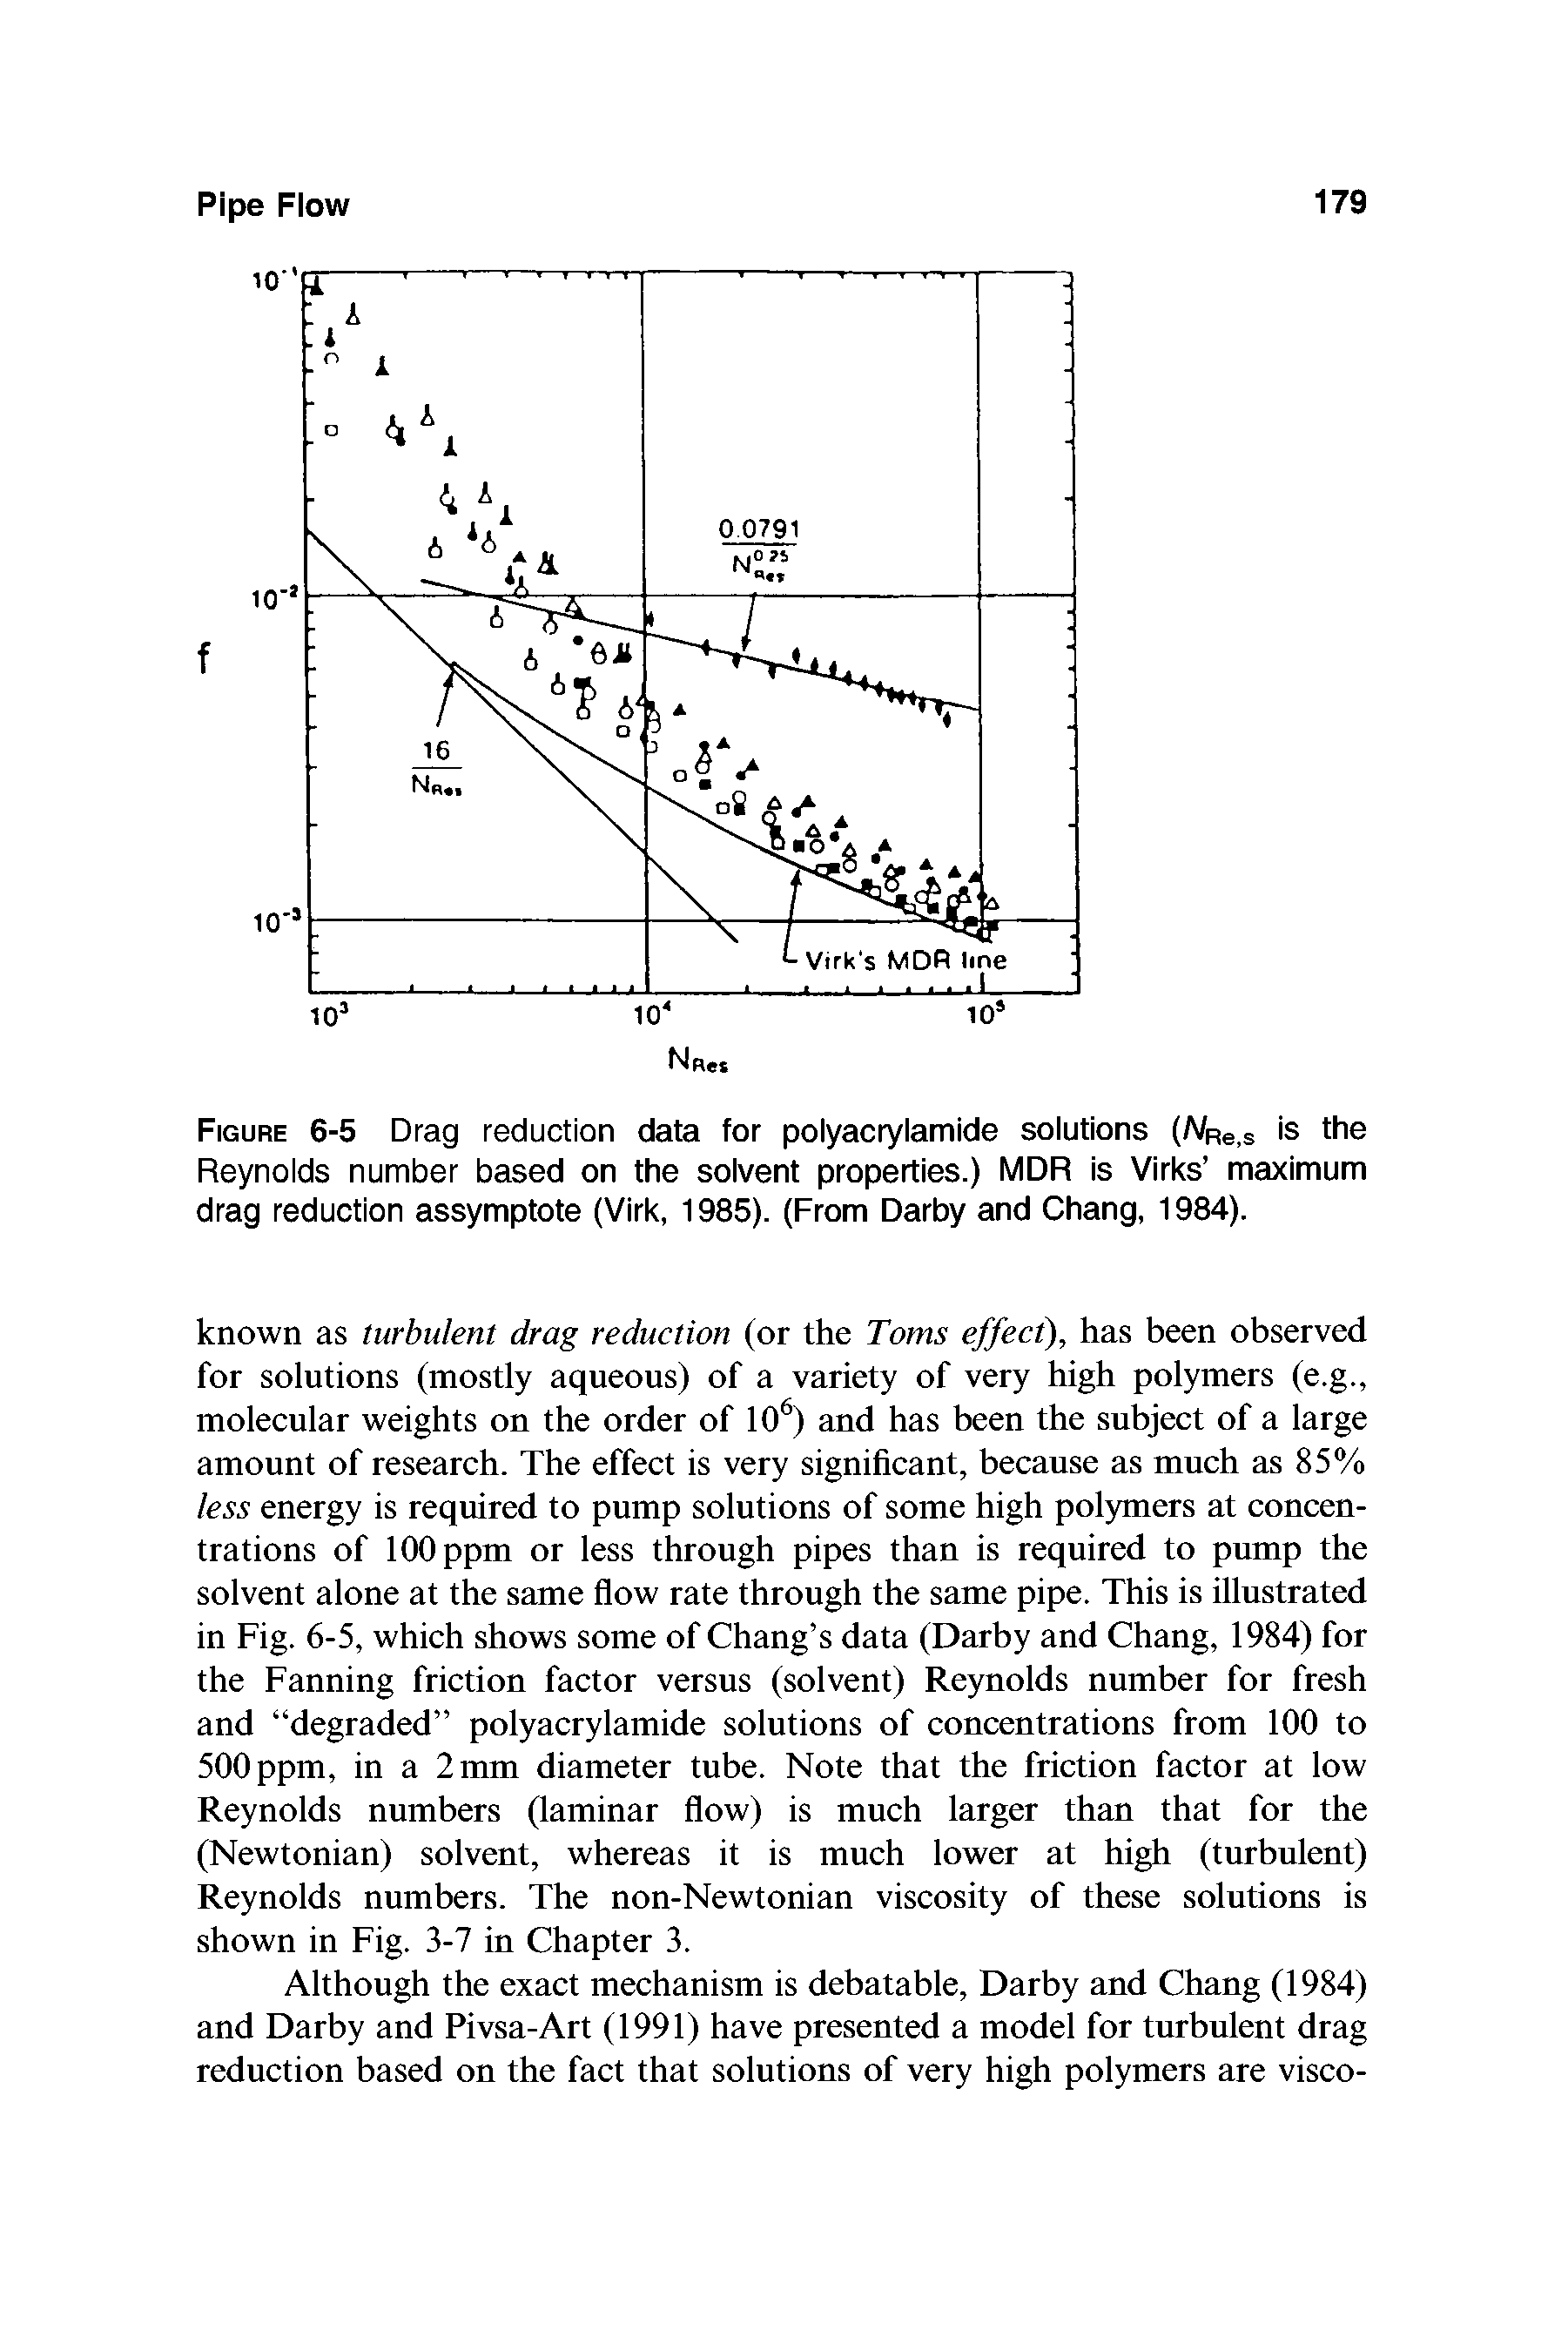 Figure 6-5 Drag reduction data for polyacrylamide solutions (A/Re,s is the Reynolds number based on the solvent properties.) MDR is Virks maximum drag reduction assymptote (Virk, 1985). (From Darby and Chang, 1984).